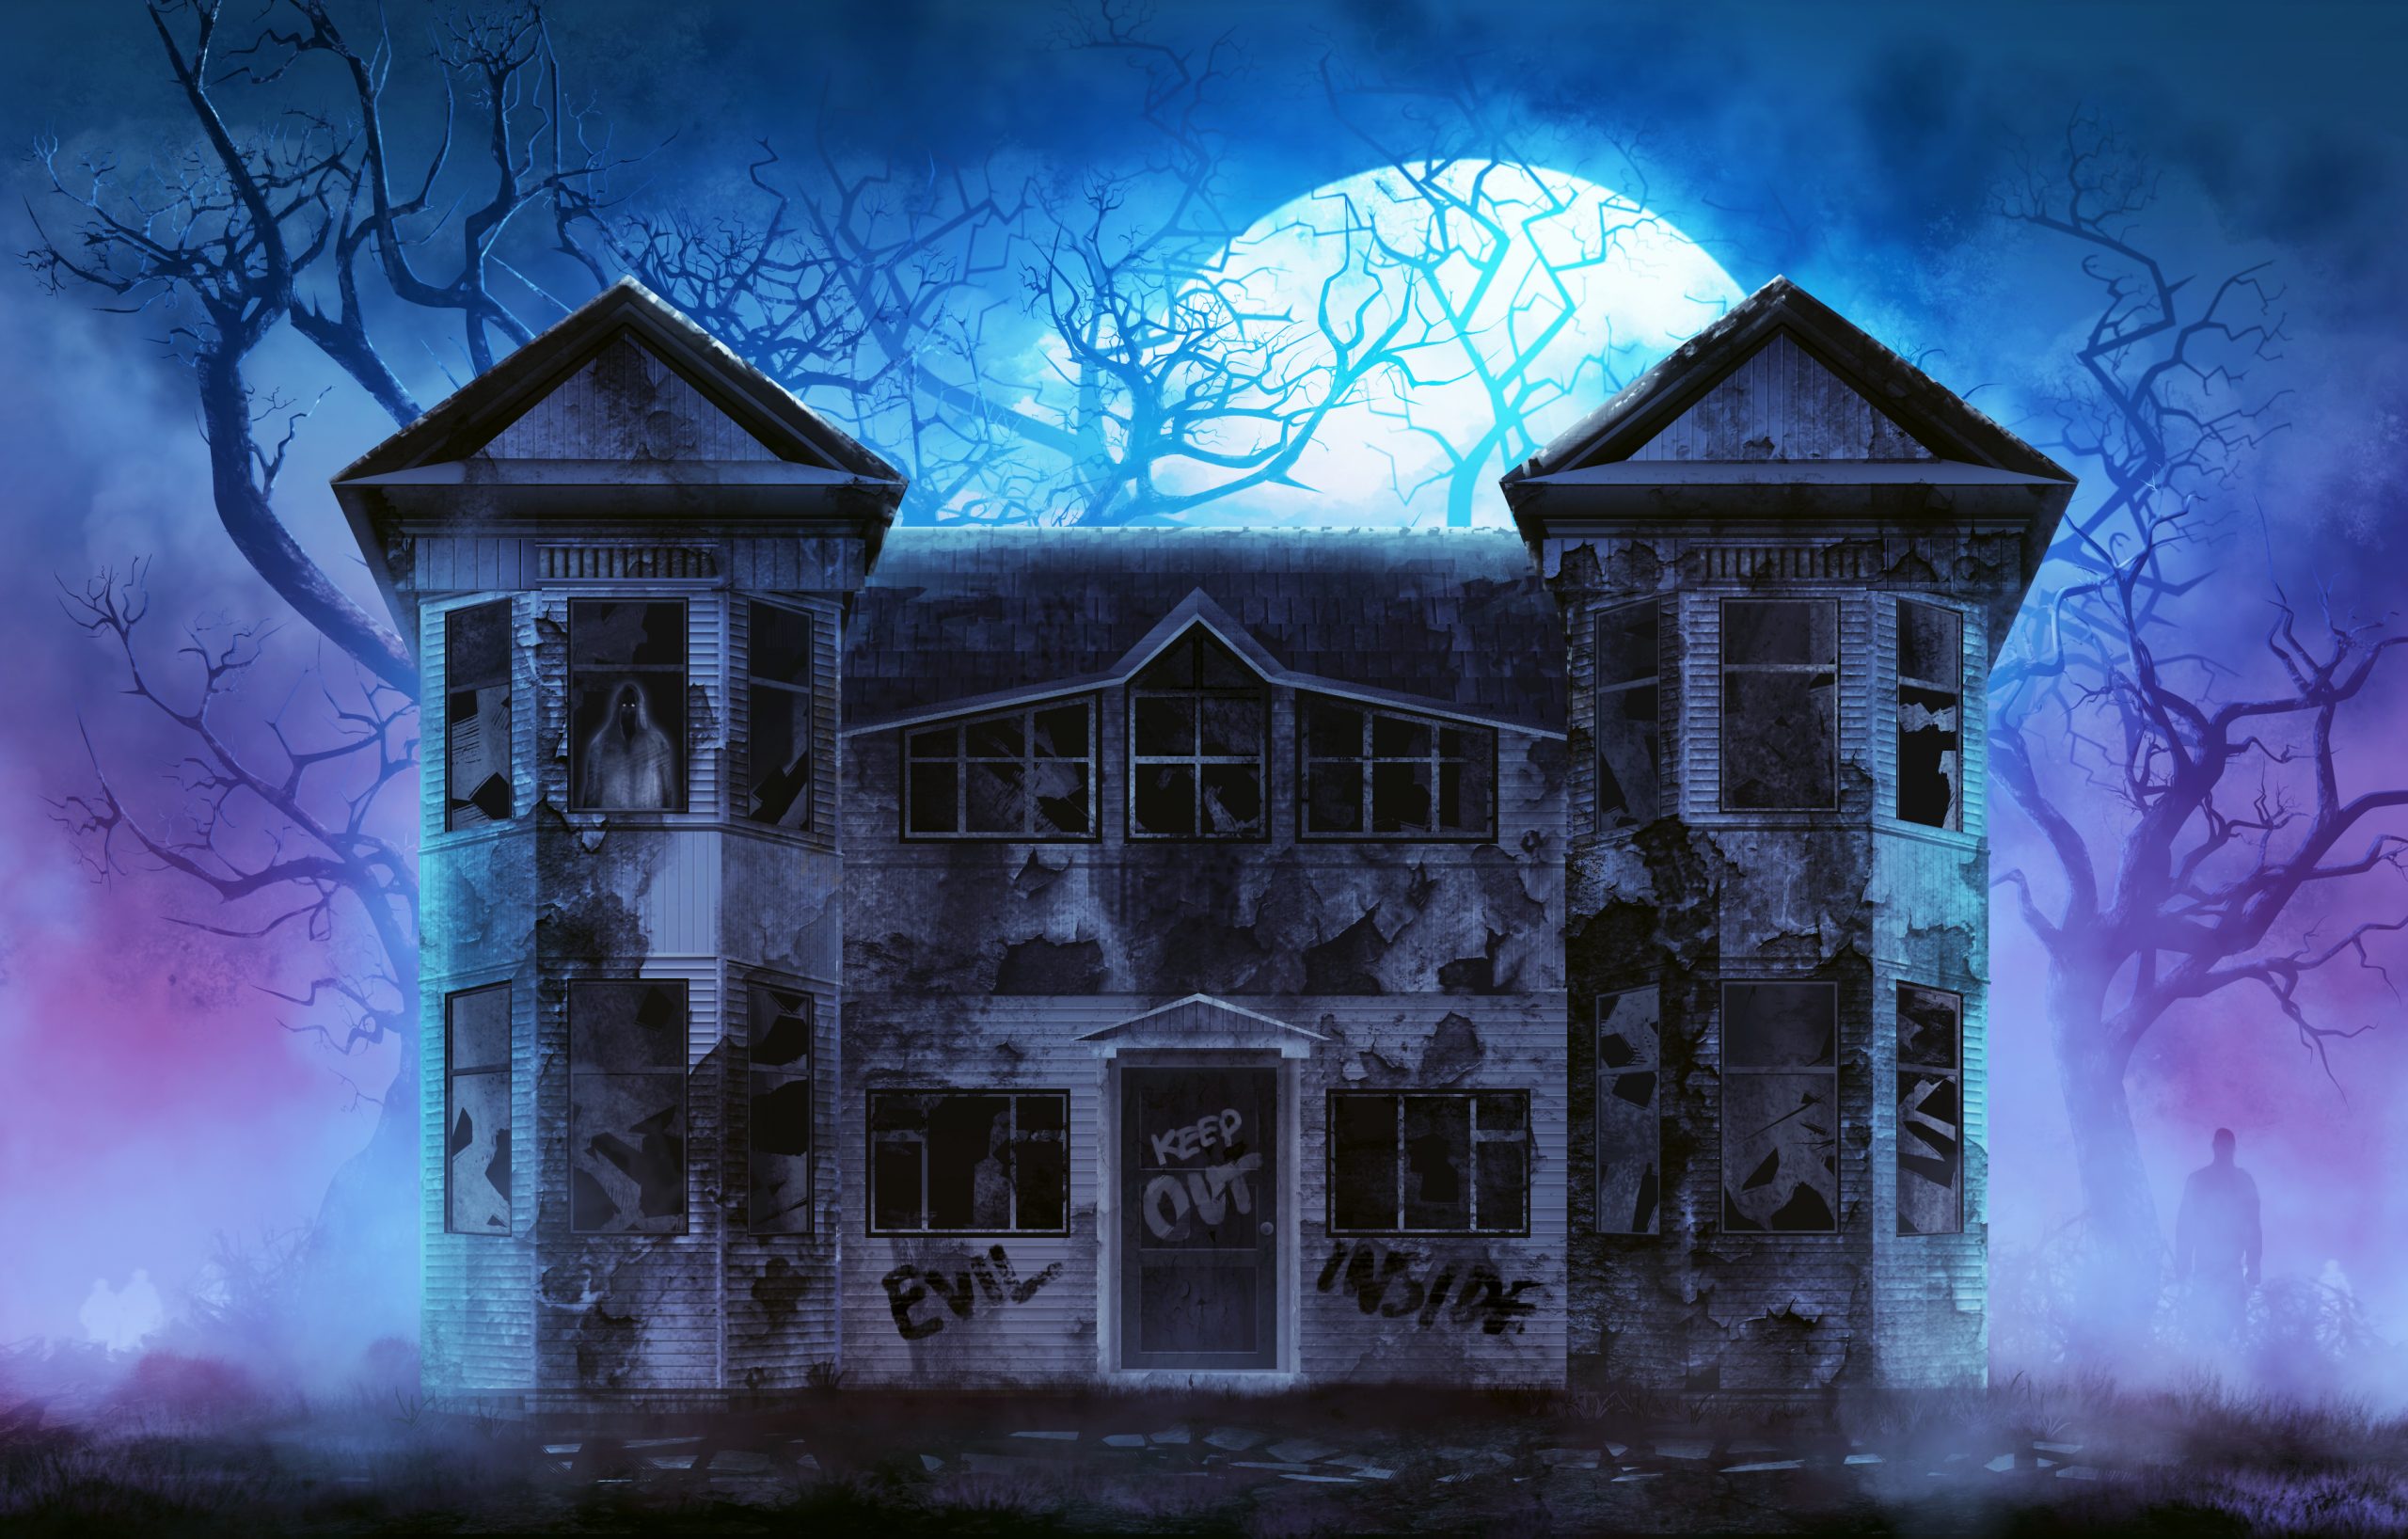 cartoon image of a SCARY looking haunted house